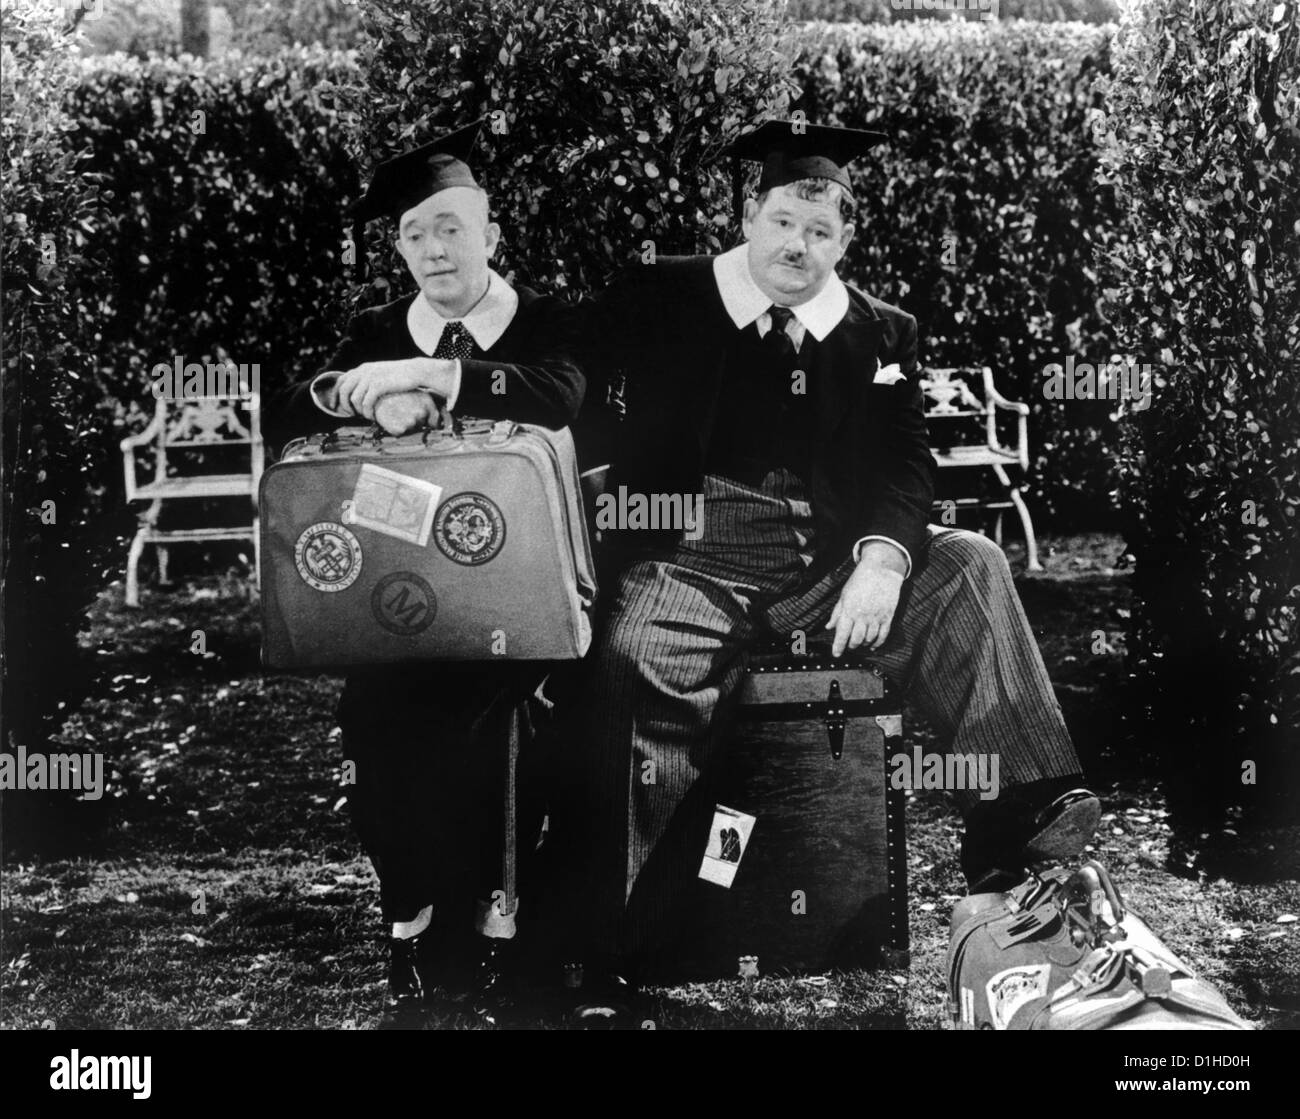 A CHUMP AT OXFORD (1940) STAN LAUREL, OLIVER HARDY, ALFRED GOULDING (DIR) CAOX 003 MOVIESTORE COLLECTION LD Stock Photo